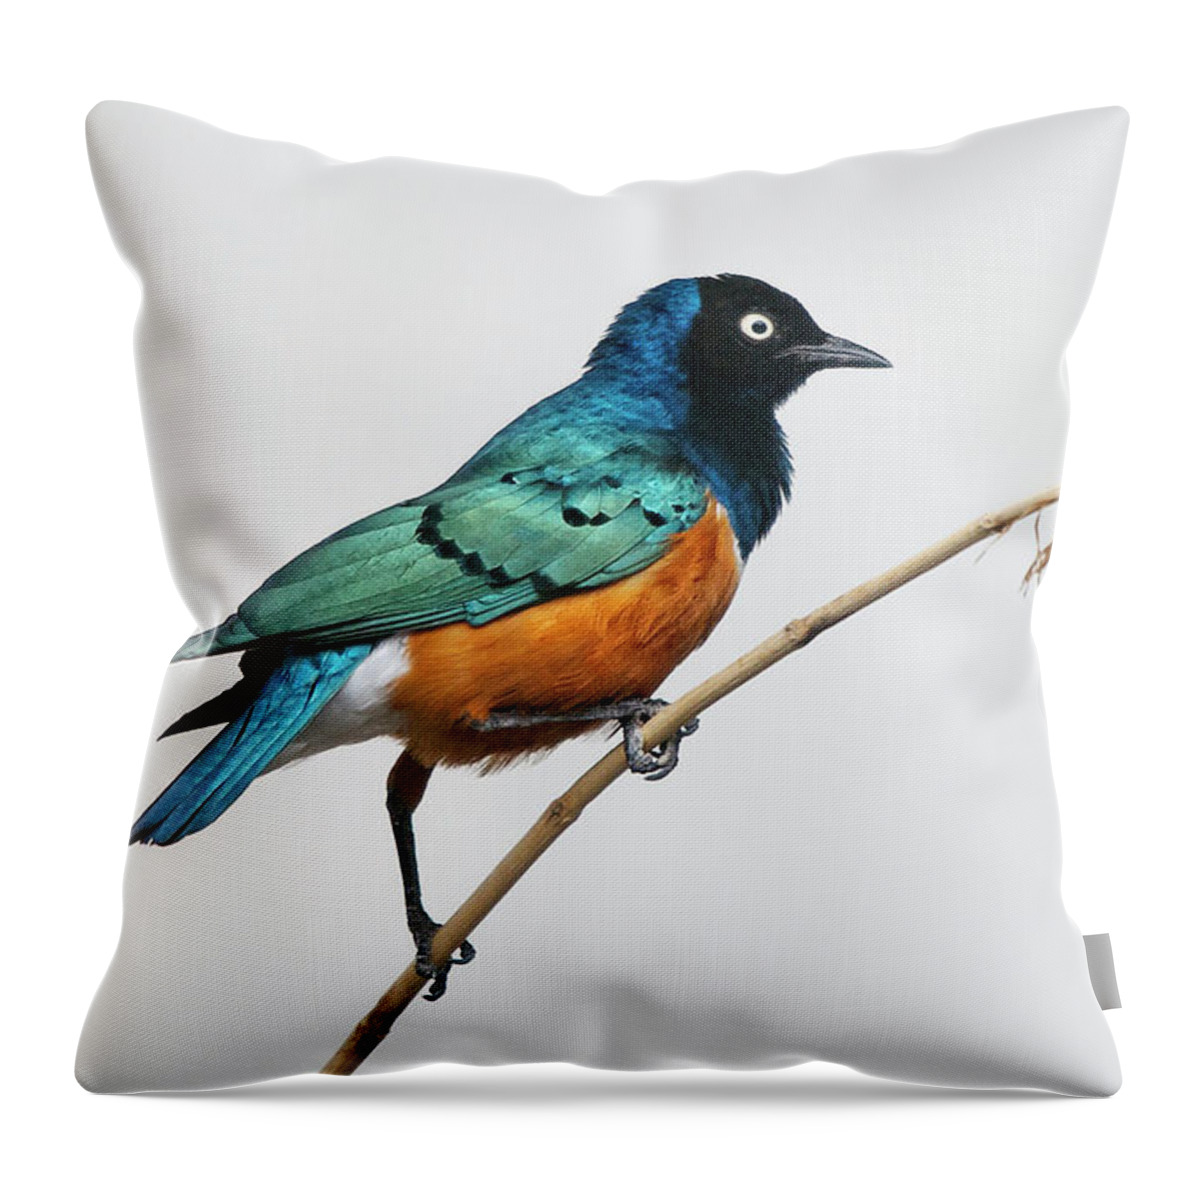 White Background Throw Pillow featuring the photograph Superb Starling by Ryan Courson Photography